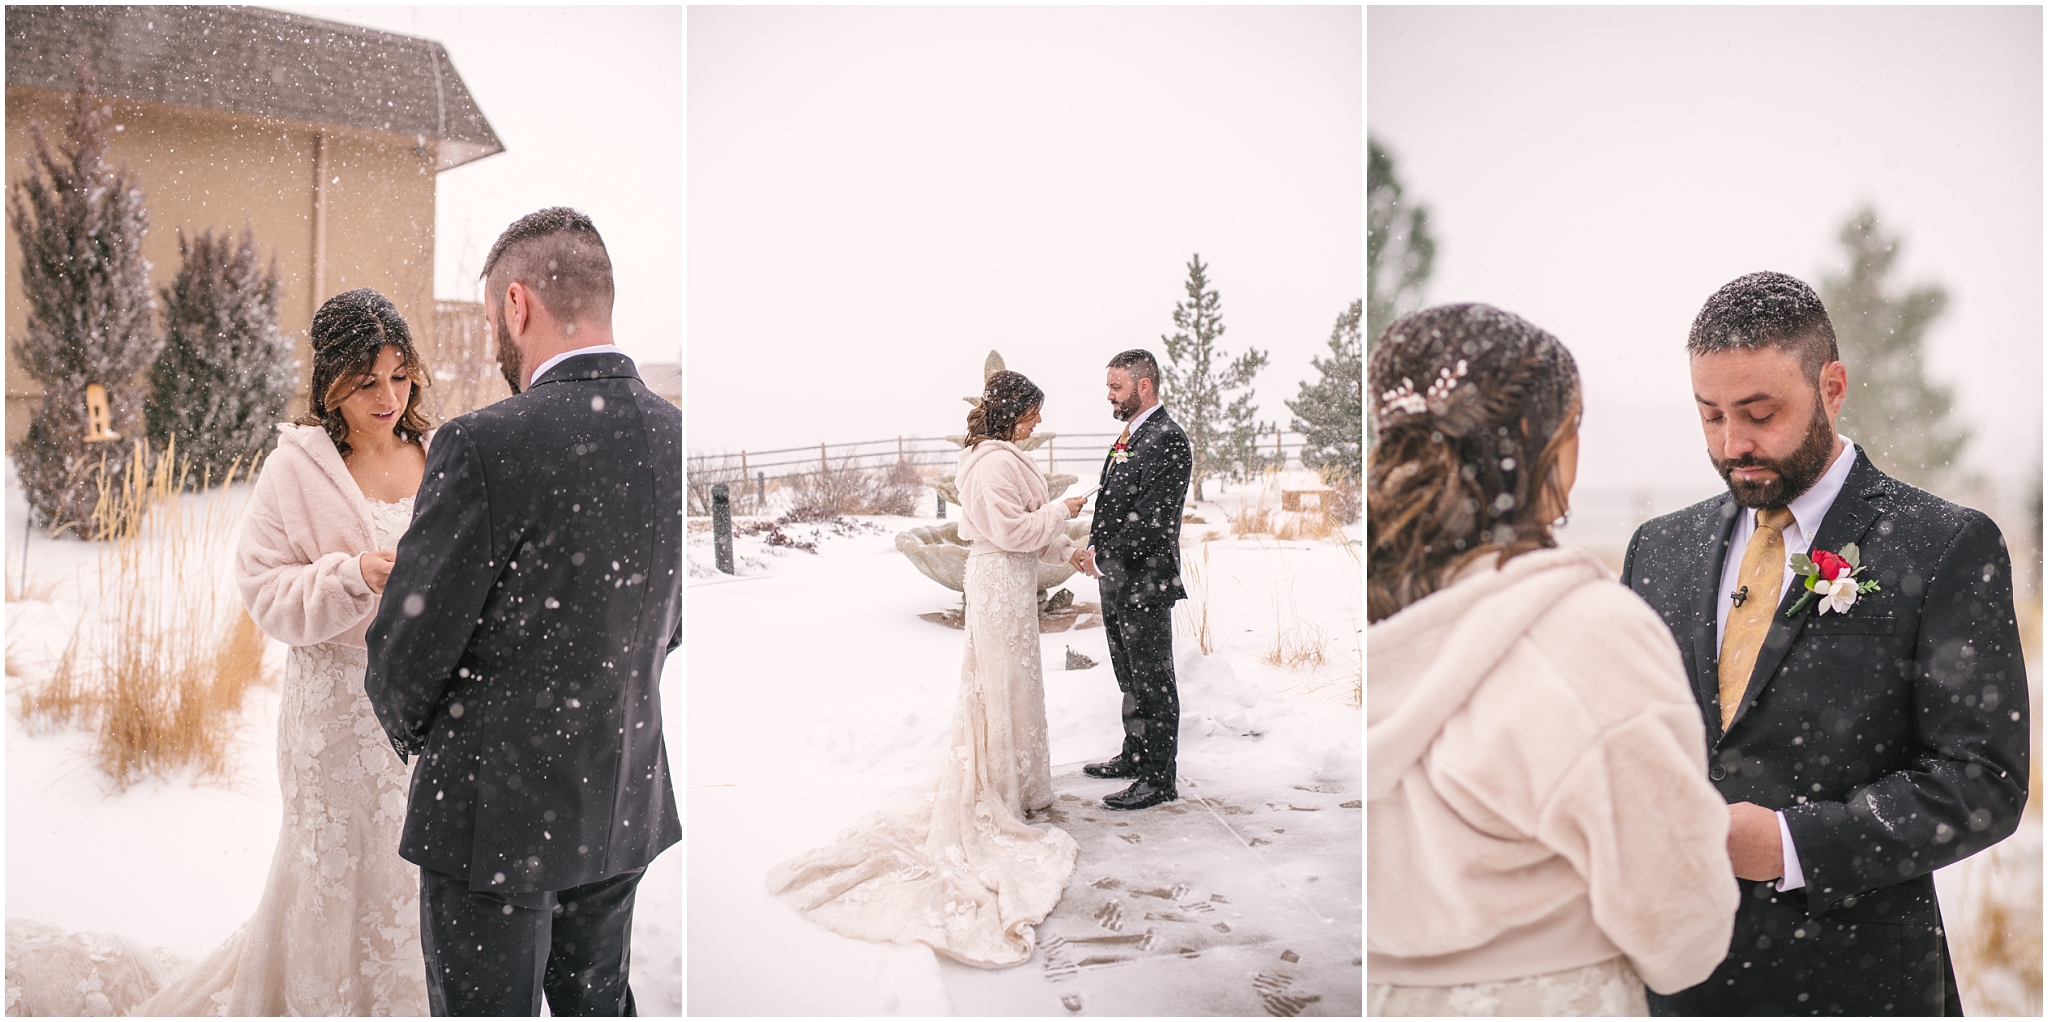 Bride and groom read their personal vows to each other in the snow outside in the garden at St Francis of Assisi Catholic Church